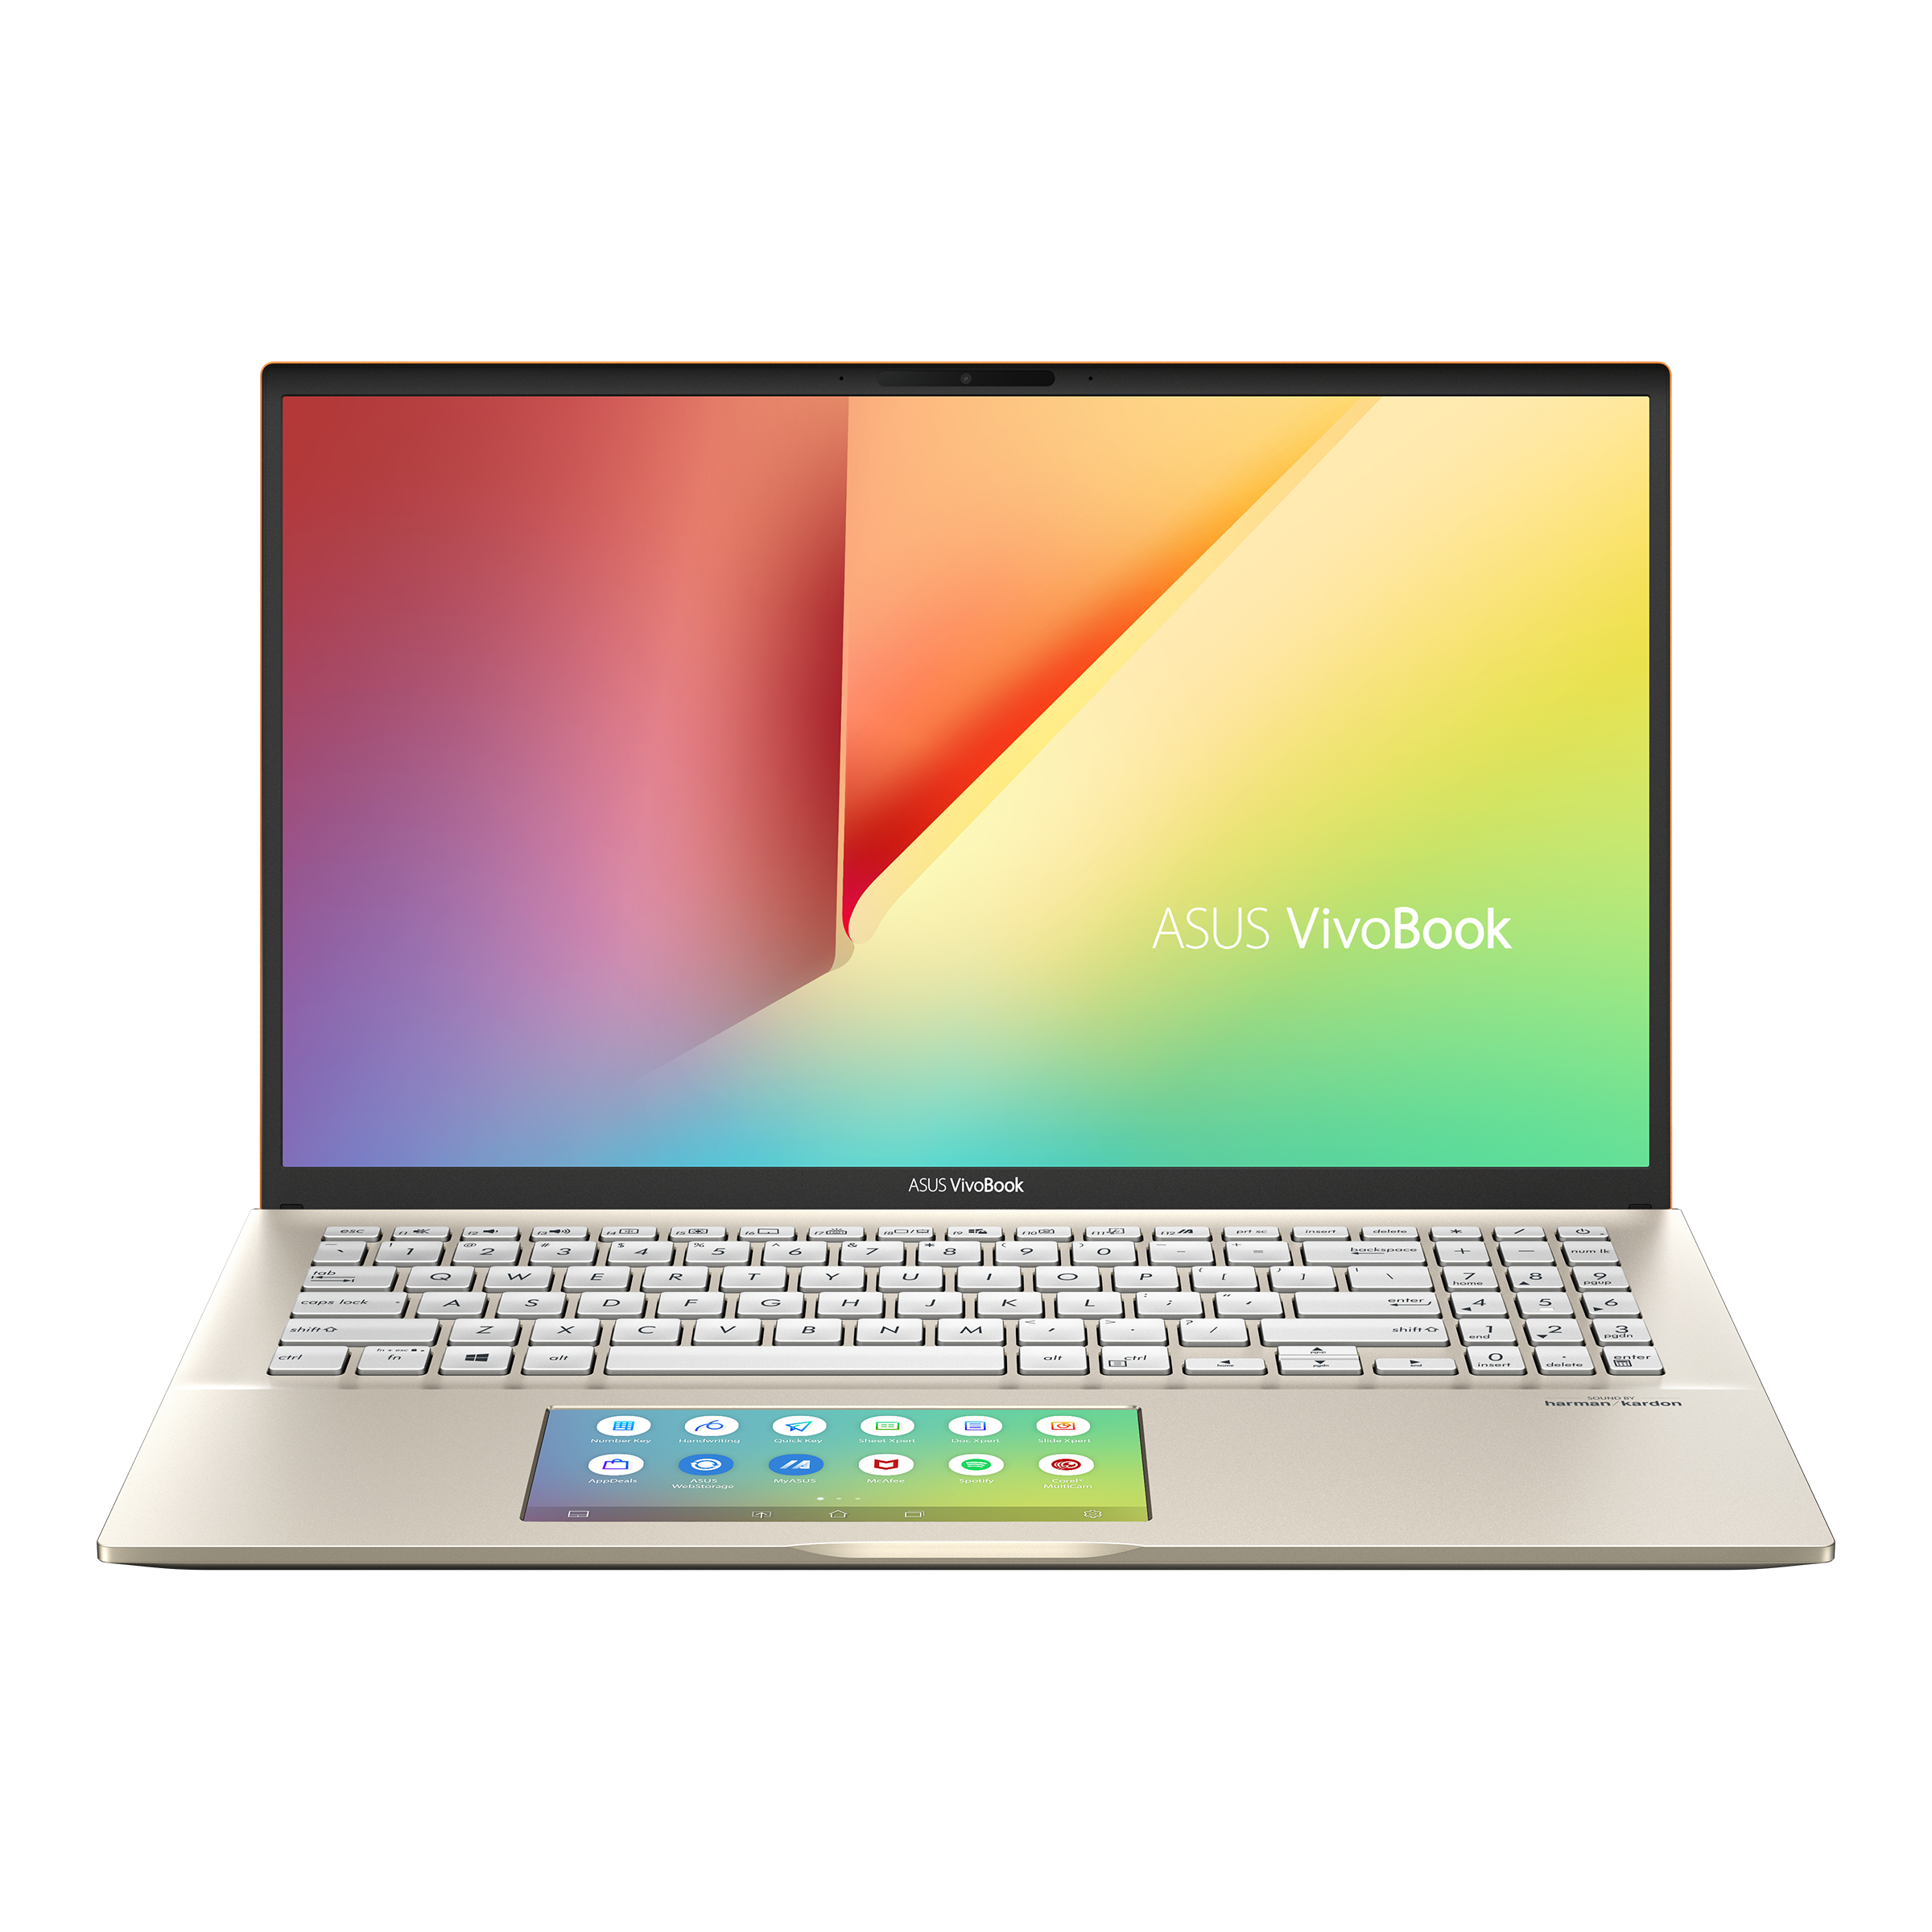 Asus Vivobook S15 Review - Watch Before You Buy 